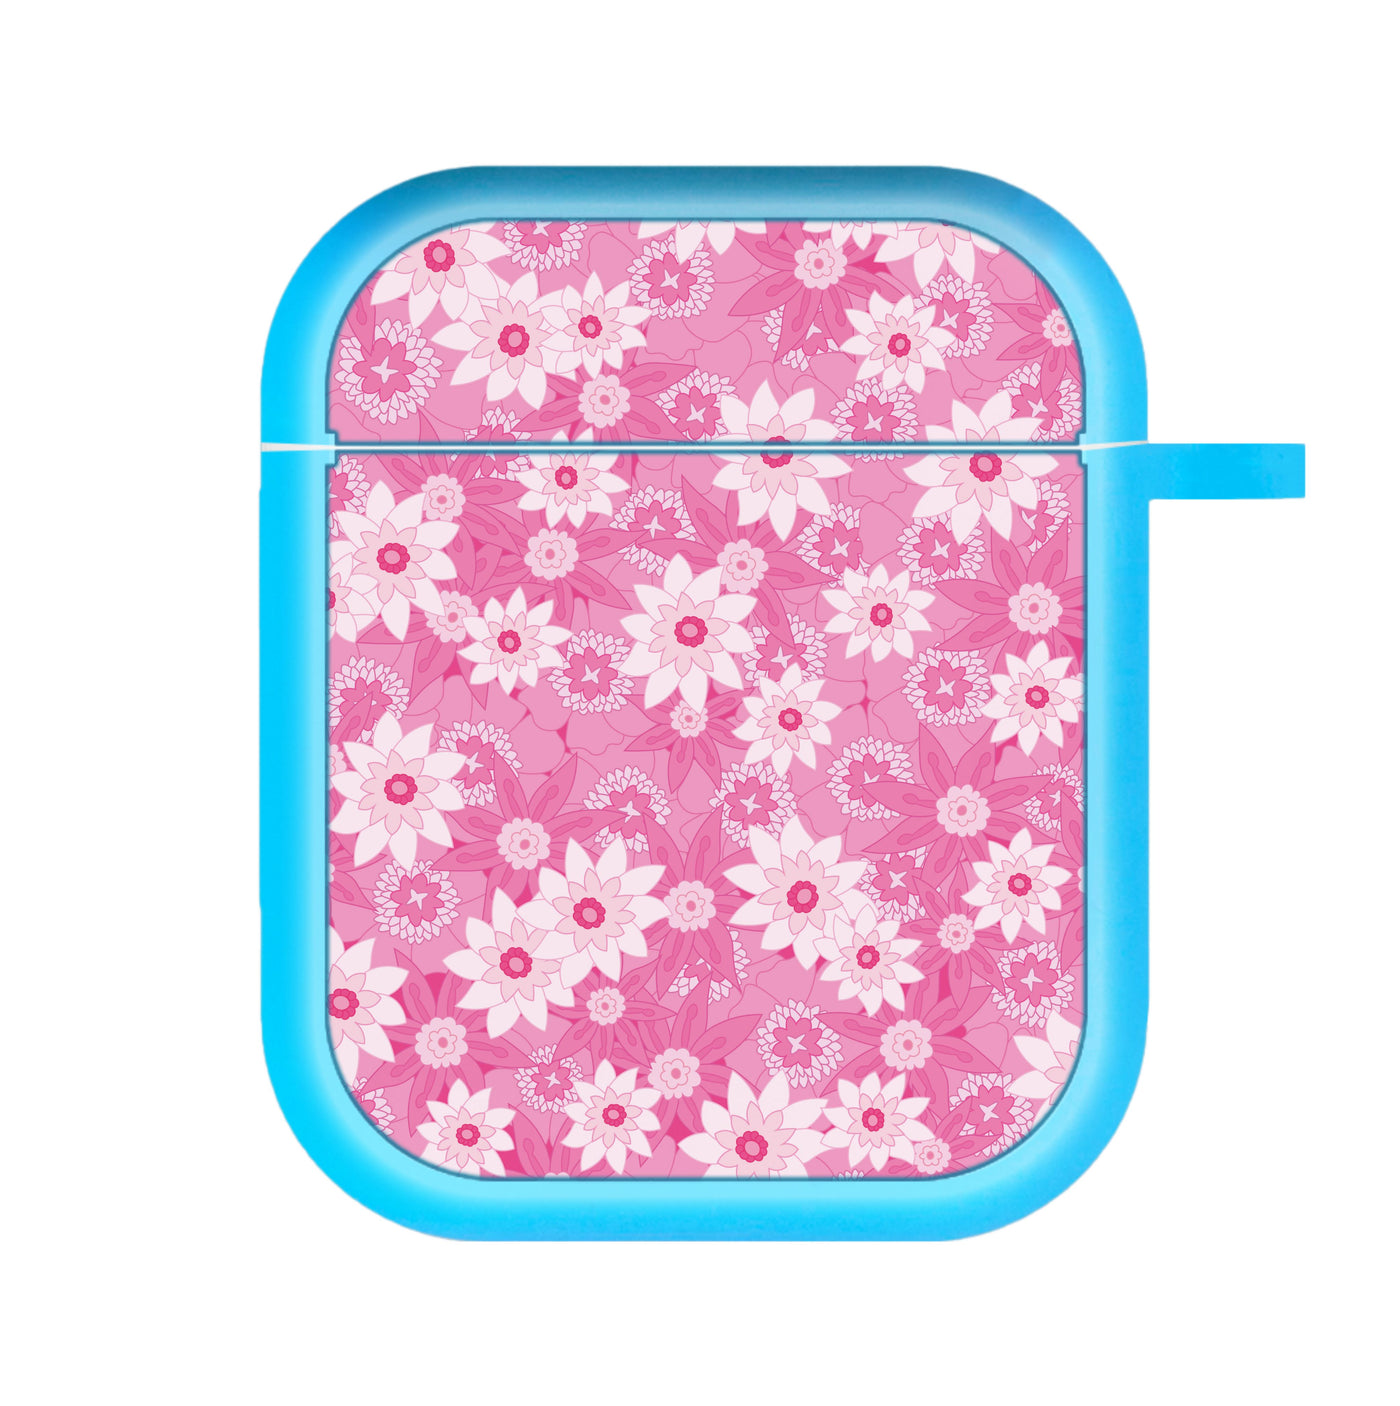 Pink Flowers - Floral Patterns AirPods Case